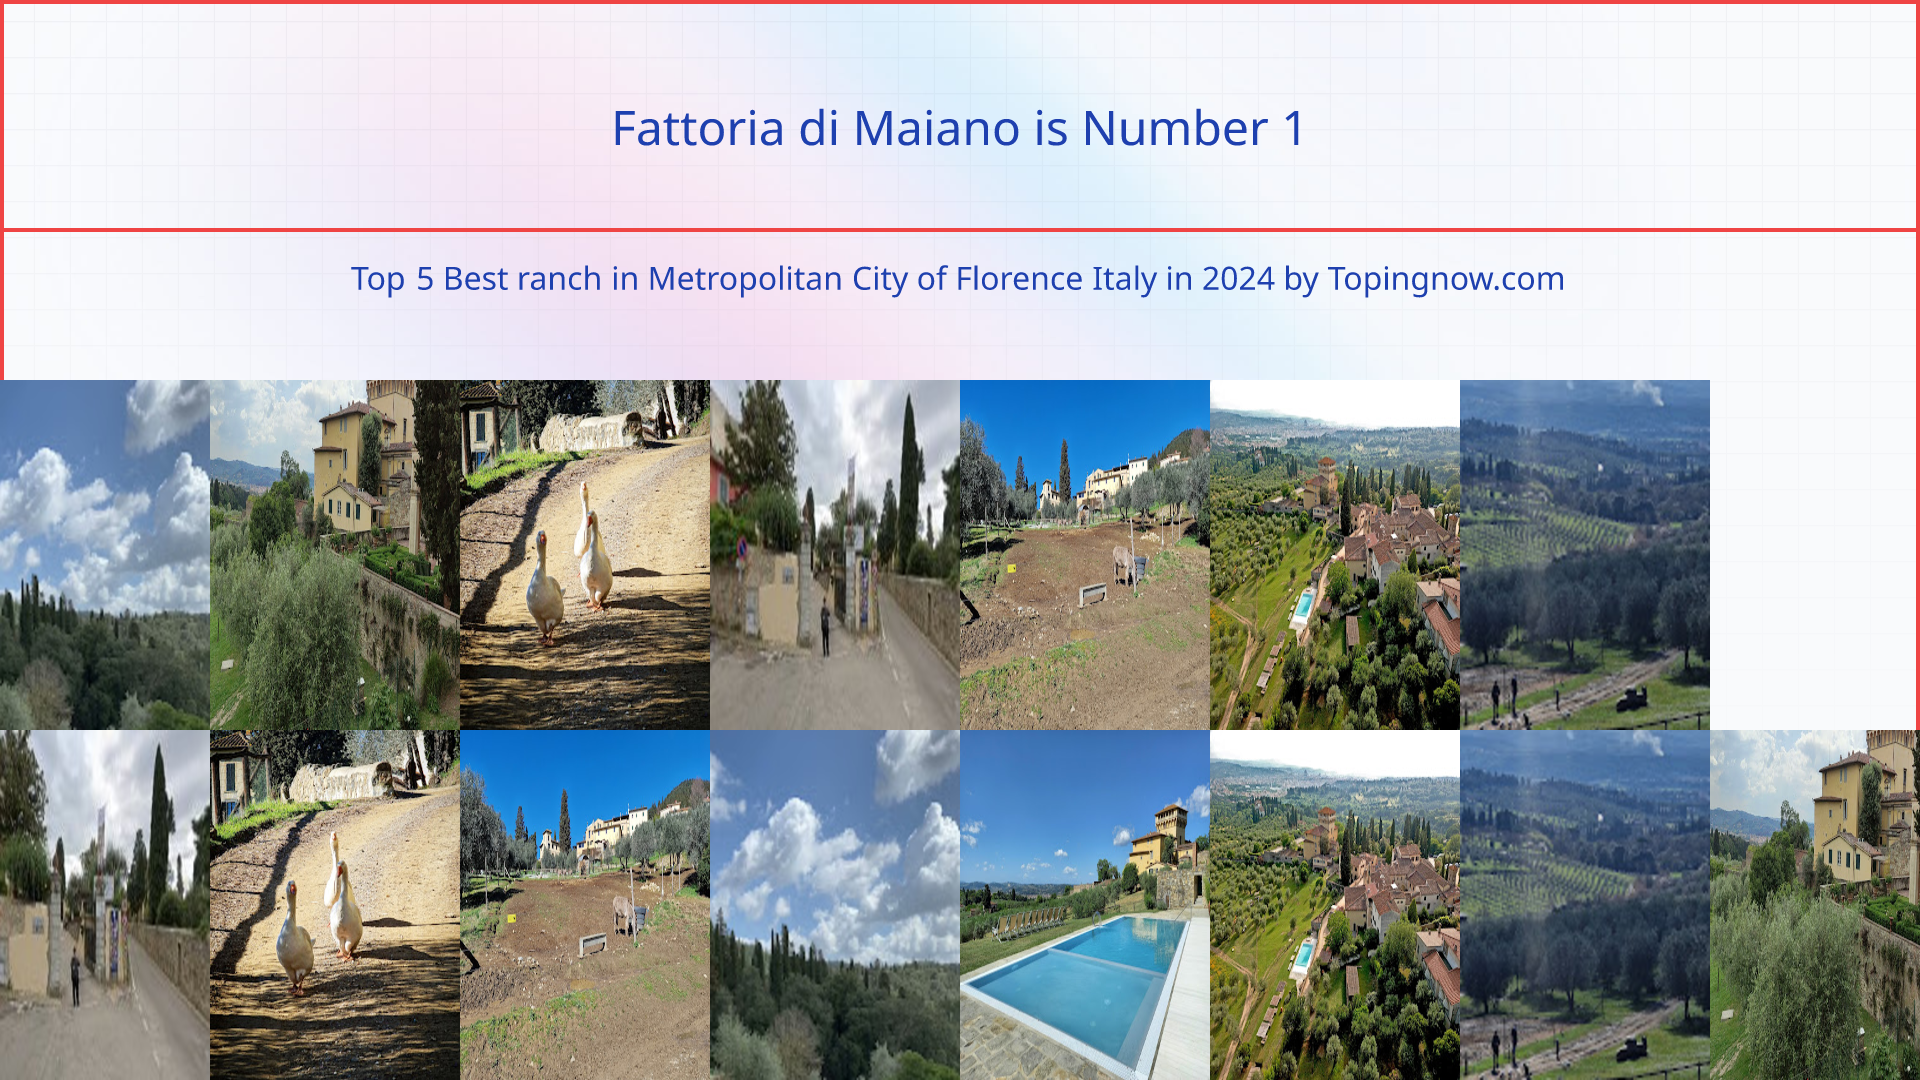 Fattoria di Maiano: Top 5 Best ranch in Metropolitan City of Florence Italy in 2024